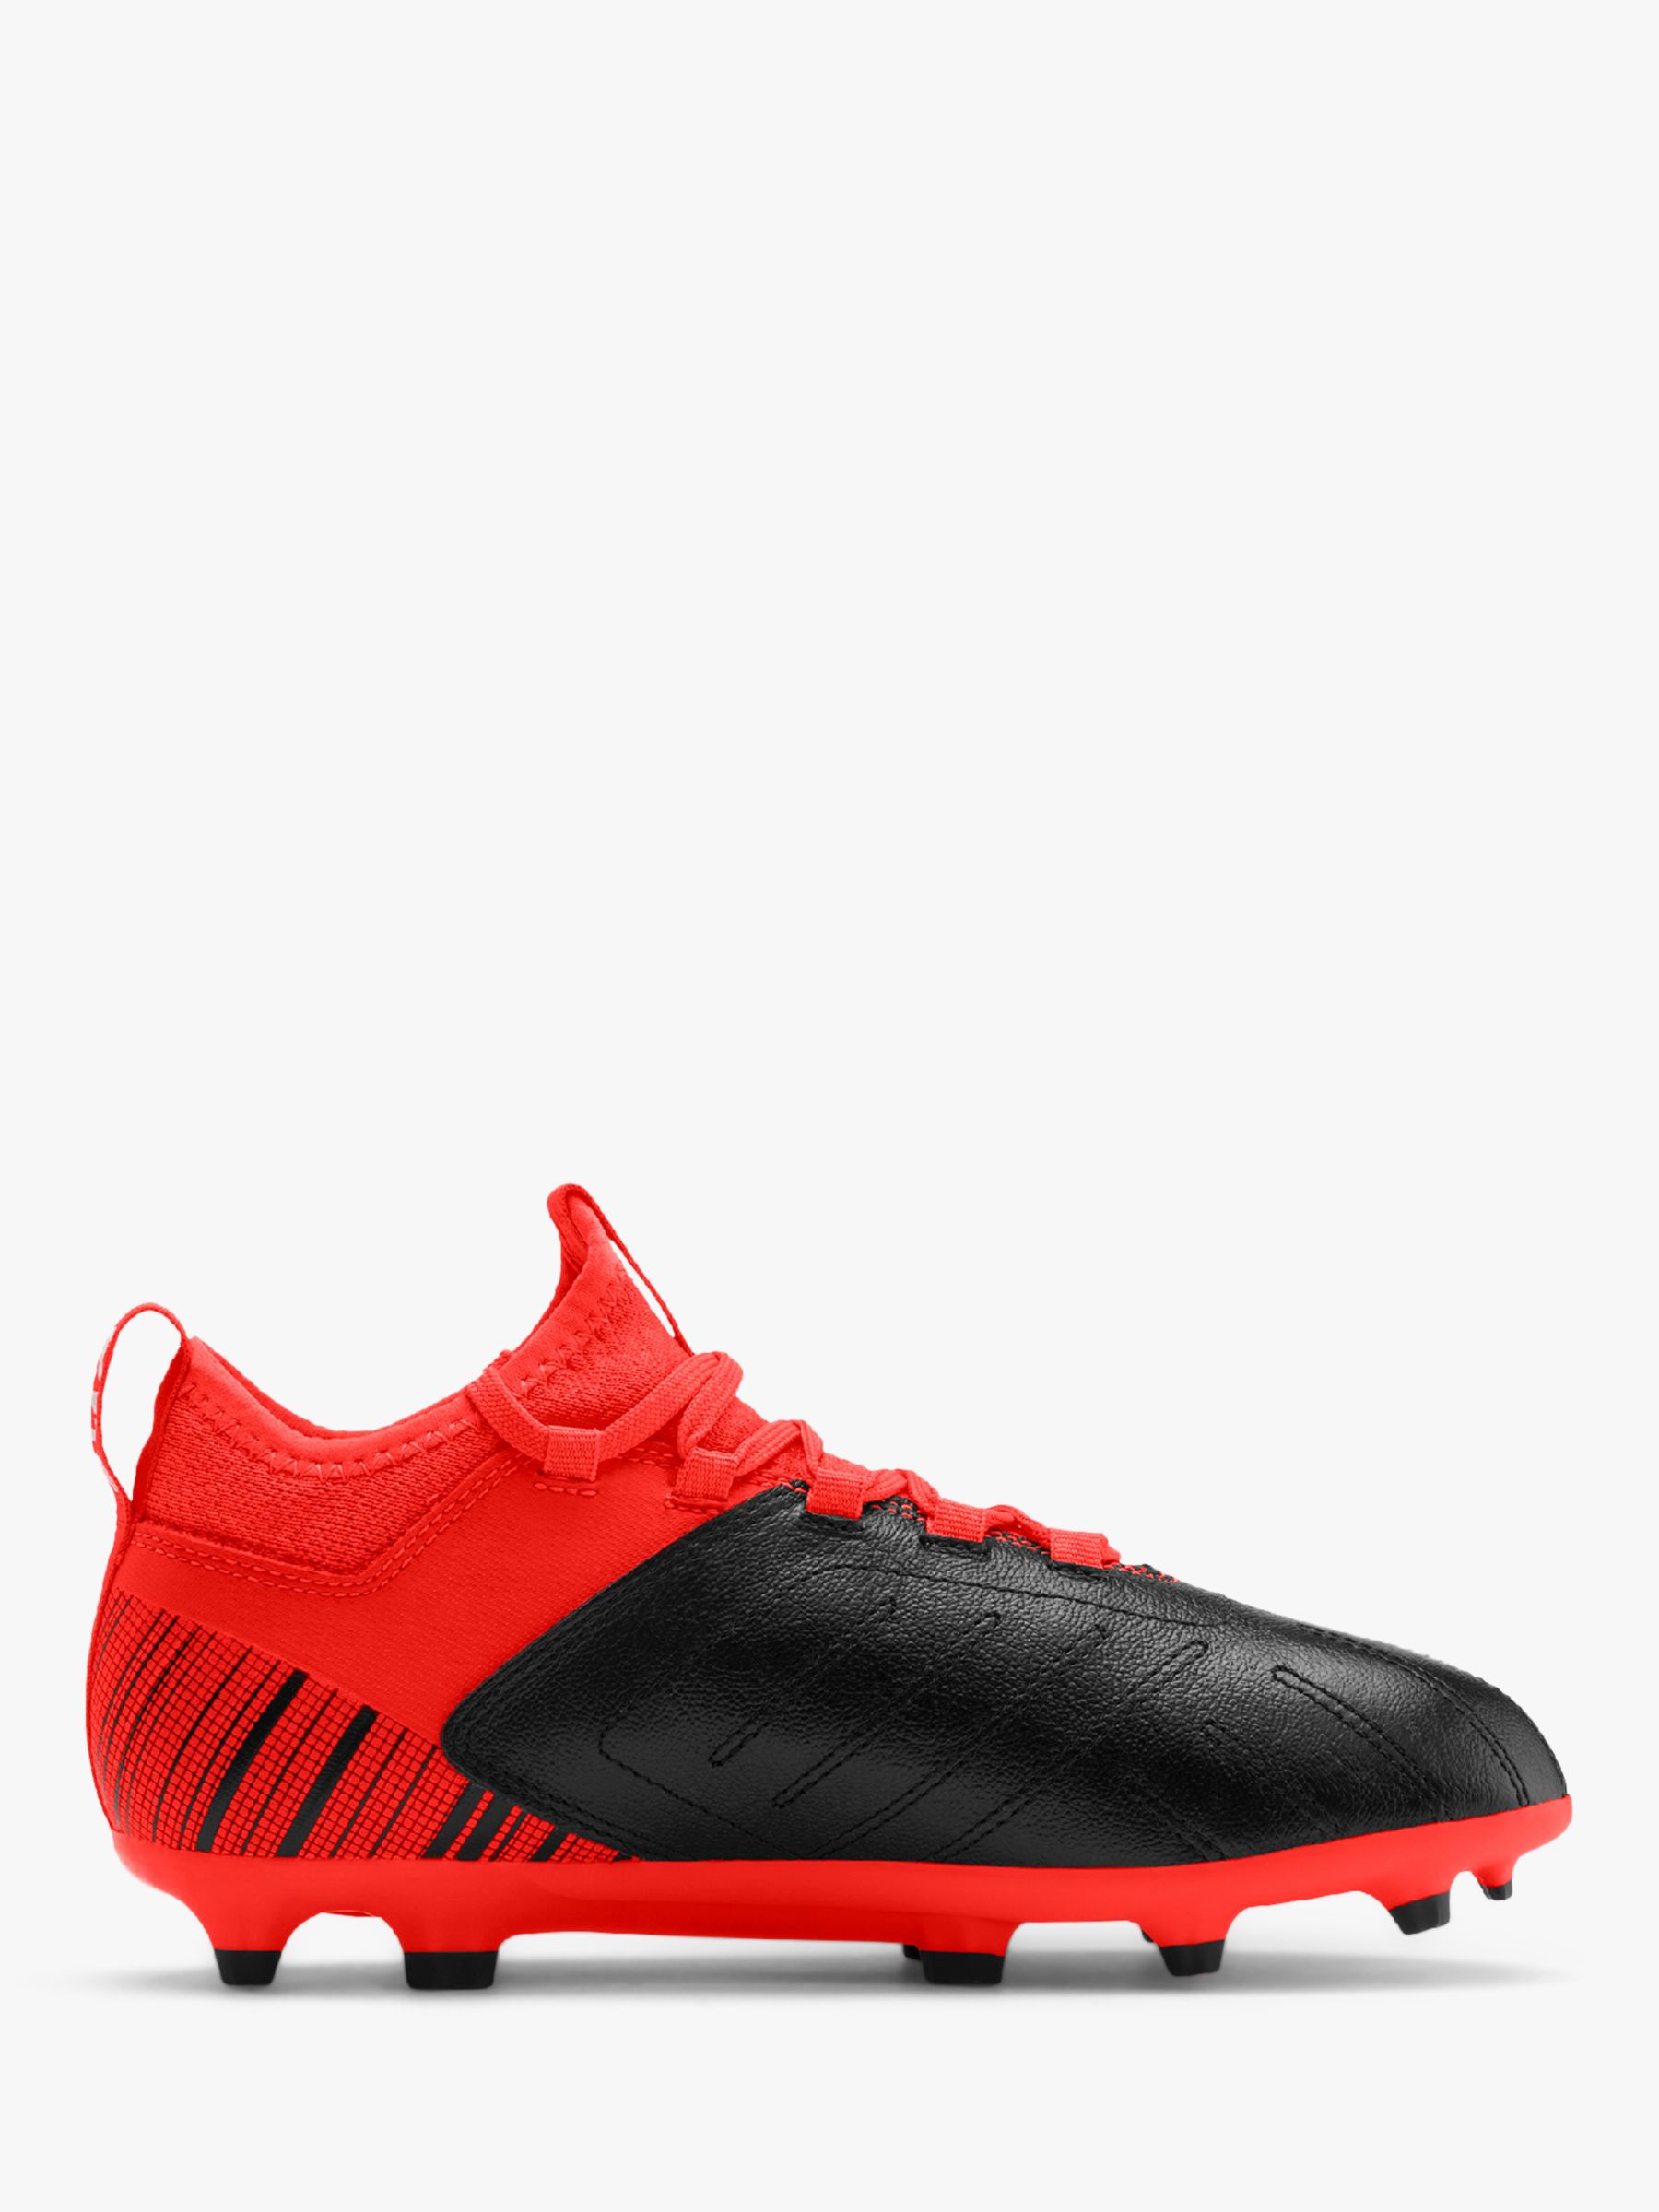 Football Boots, Black/NRGY Red 